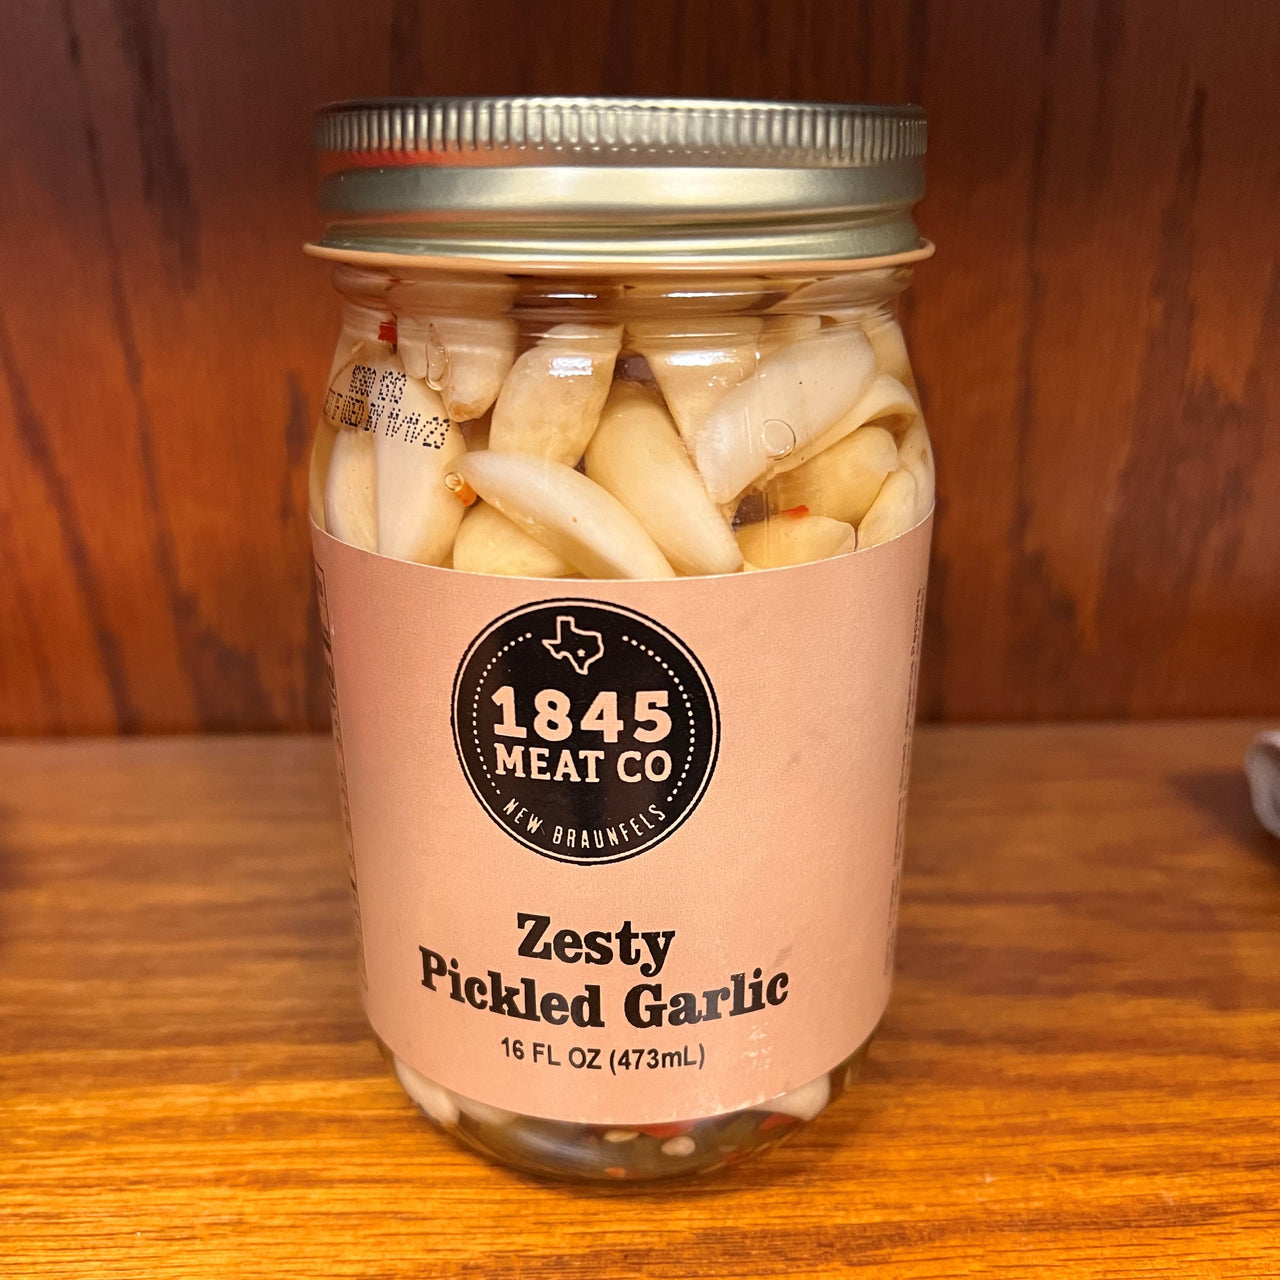 ﻿This Pickled Garlic is combined with Jalapeno Peppers and is perfect on a meat & cheese board or as a zesty snack.